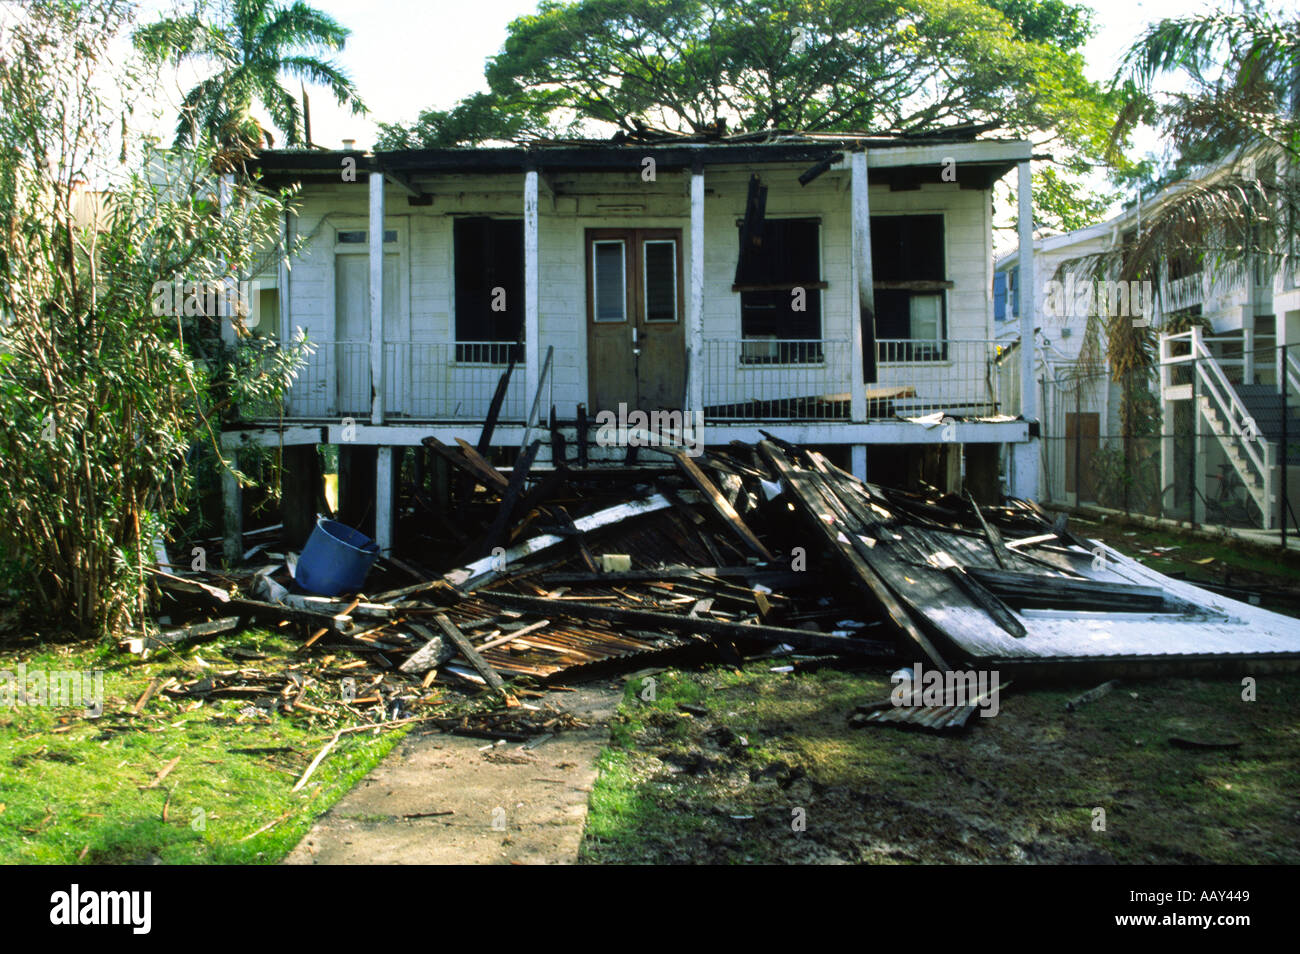 Hurricane damaged House in Belize City Belize Central America Stock Photo